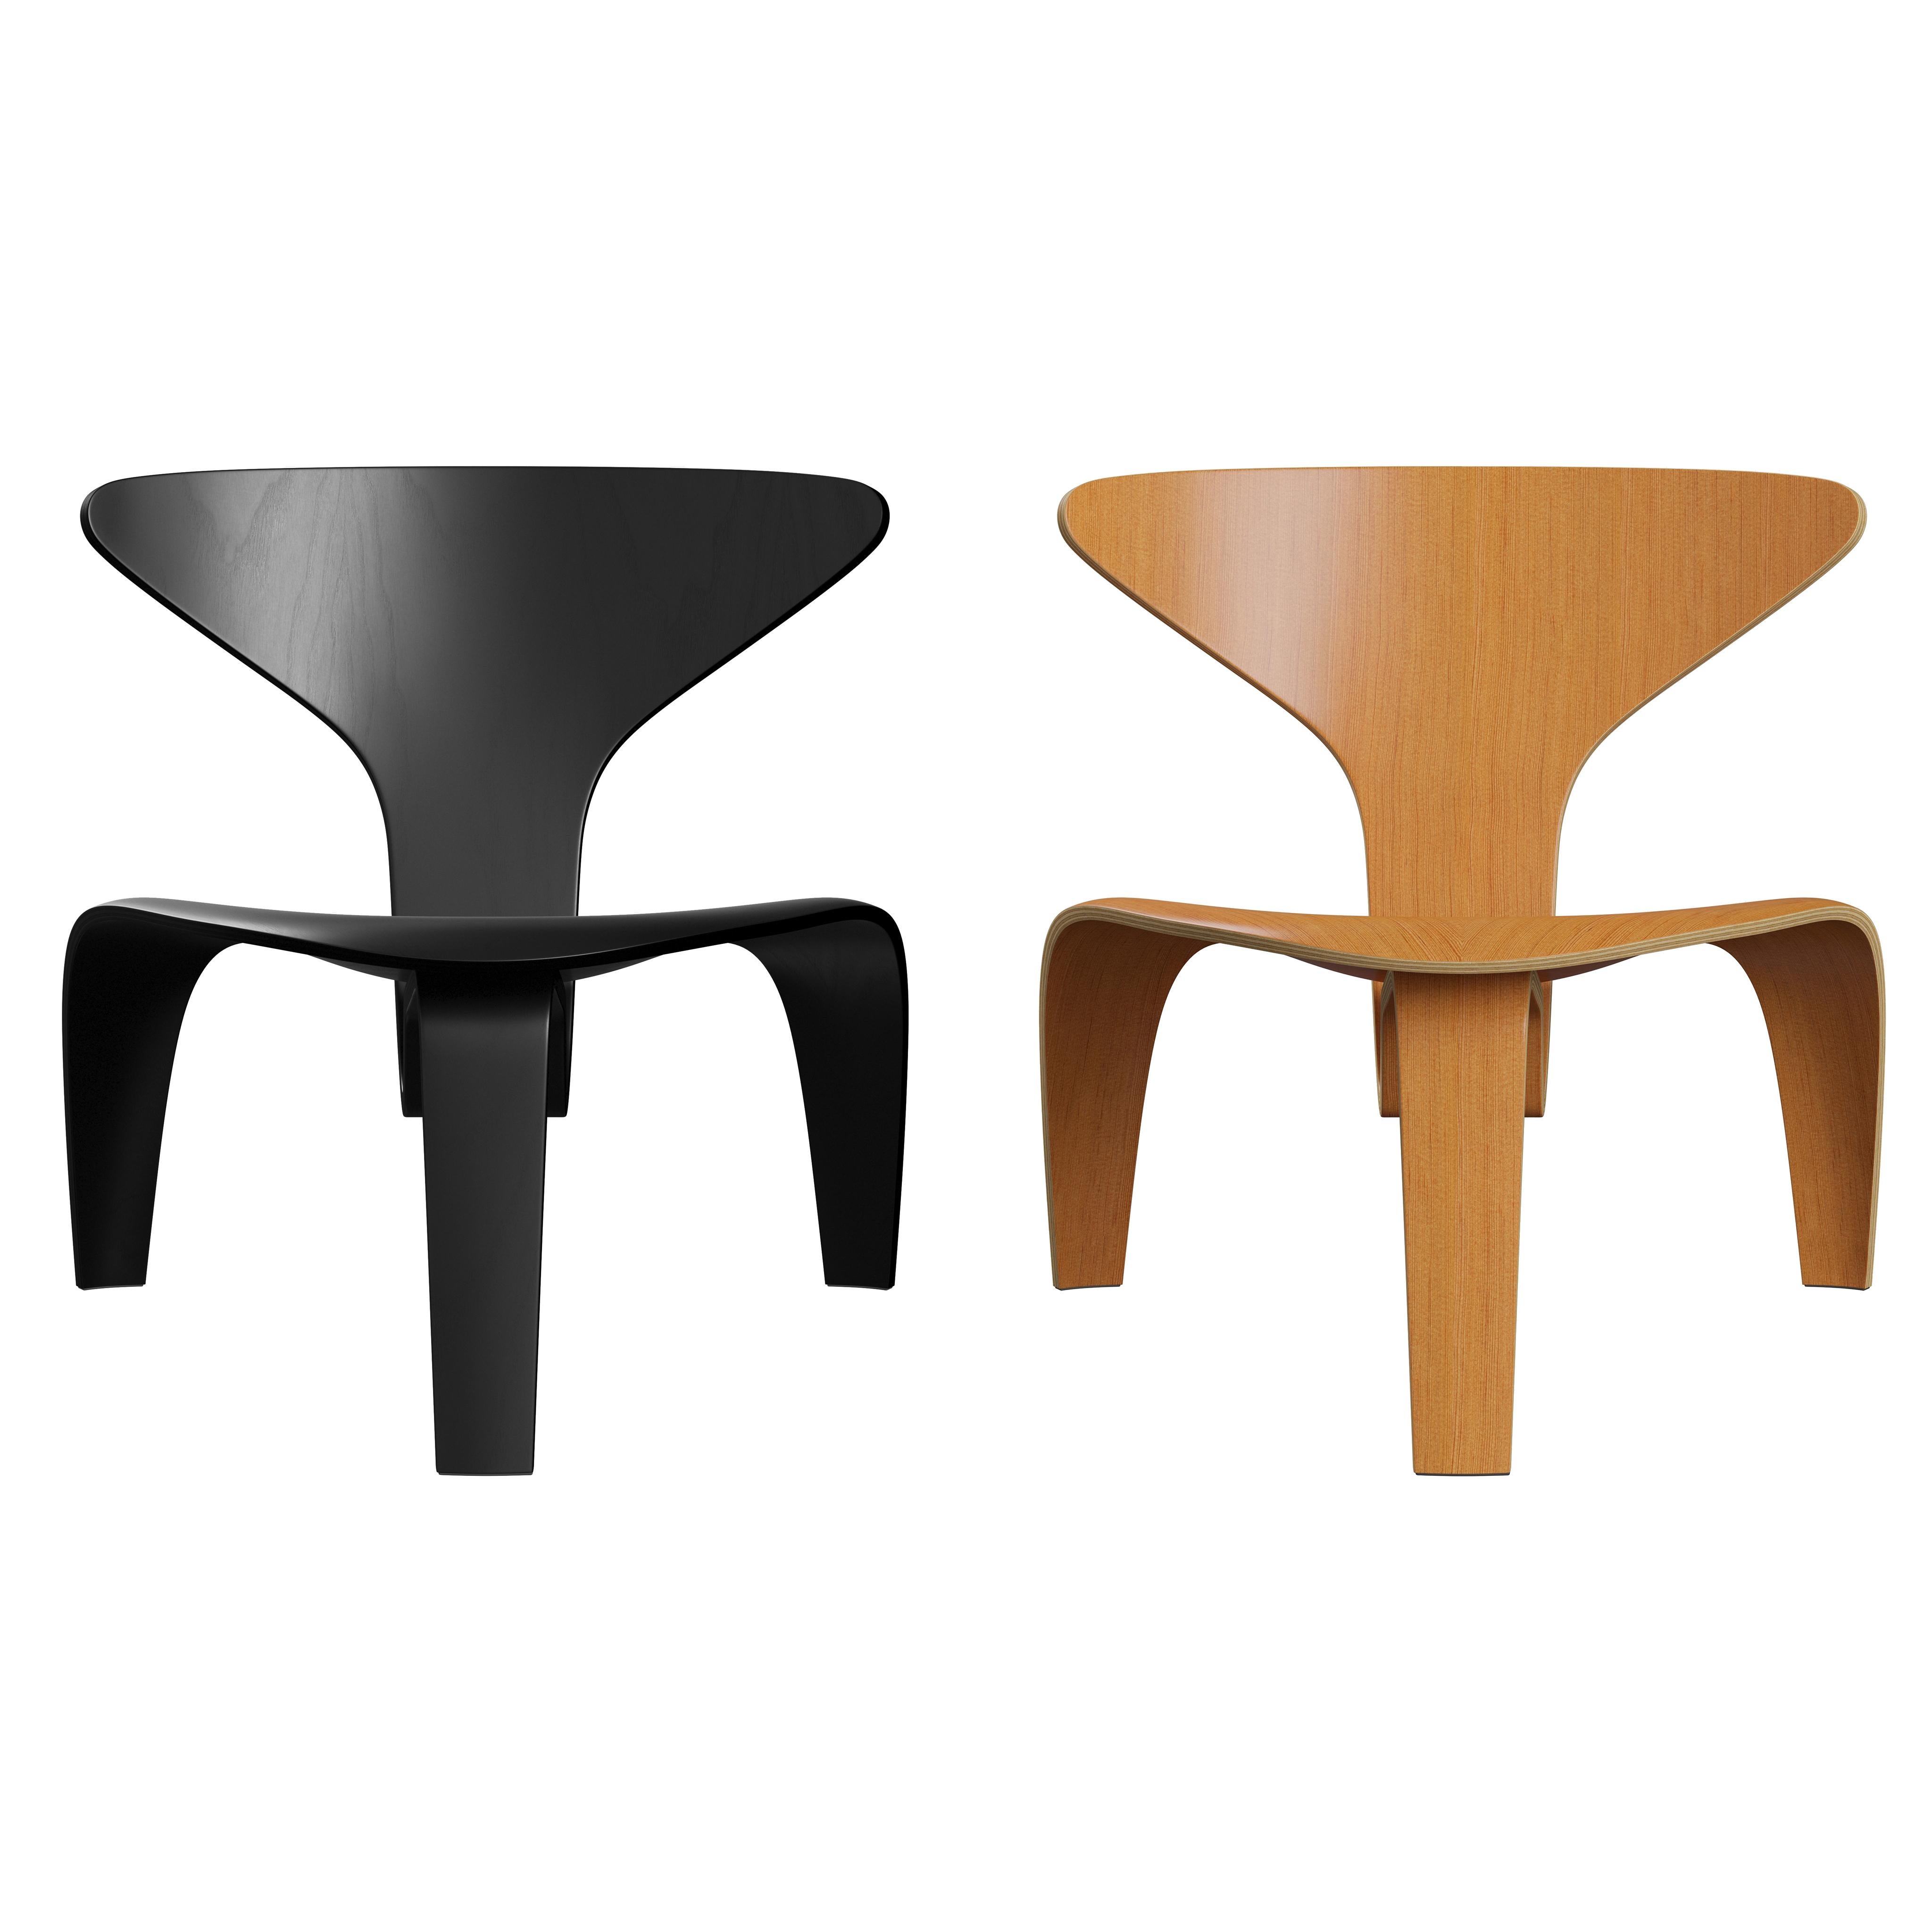 Contemporary Poul Kjærholm 'PK0 A' Chair for Fritz Hansen in Black Colored Ash For Sale